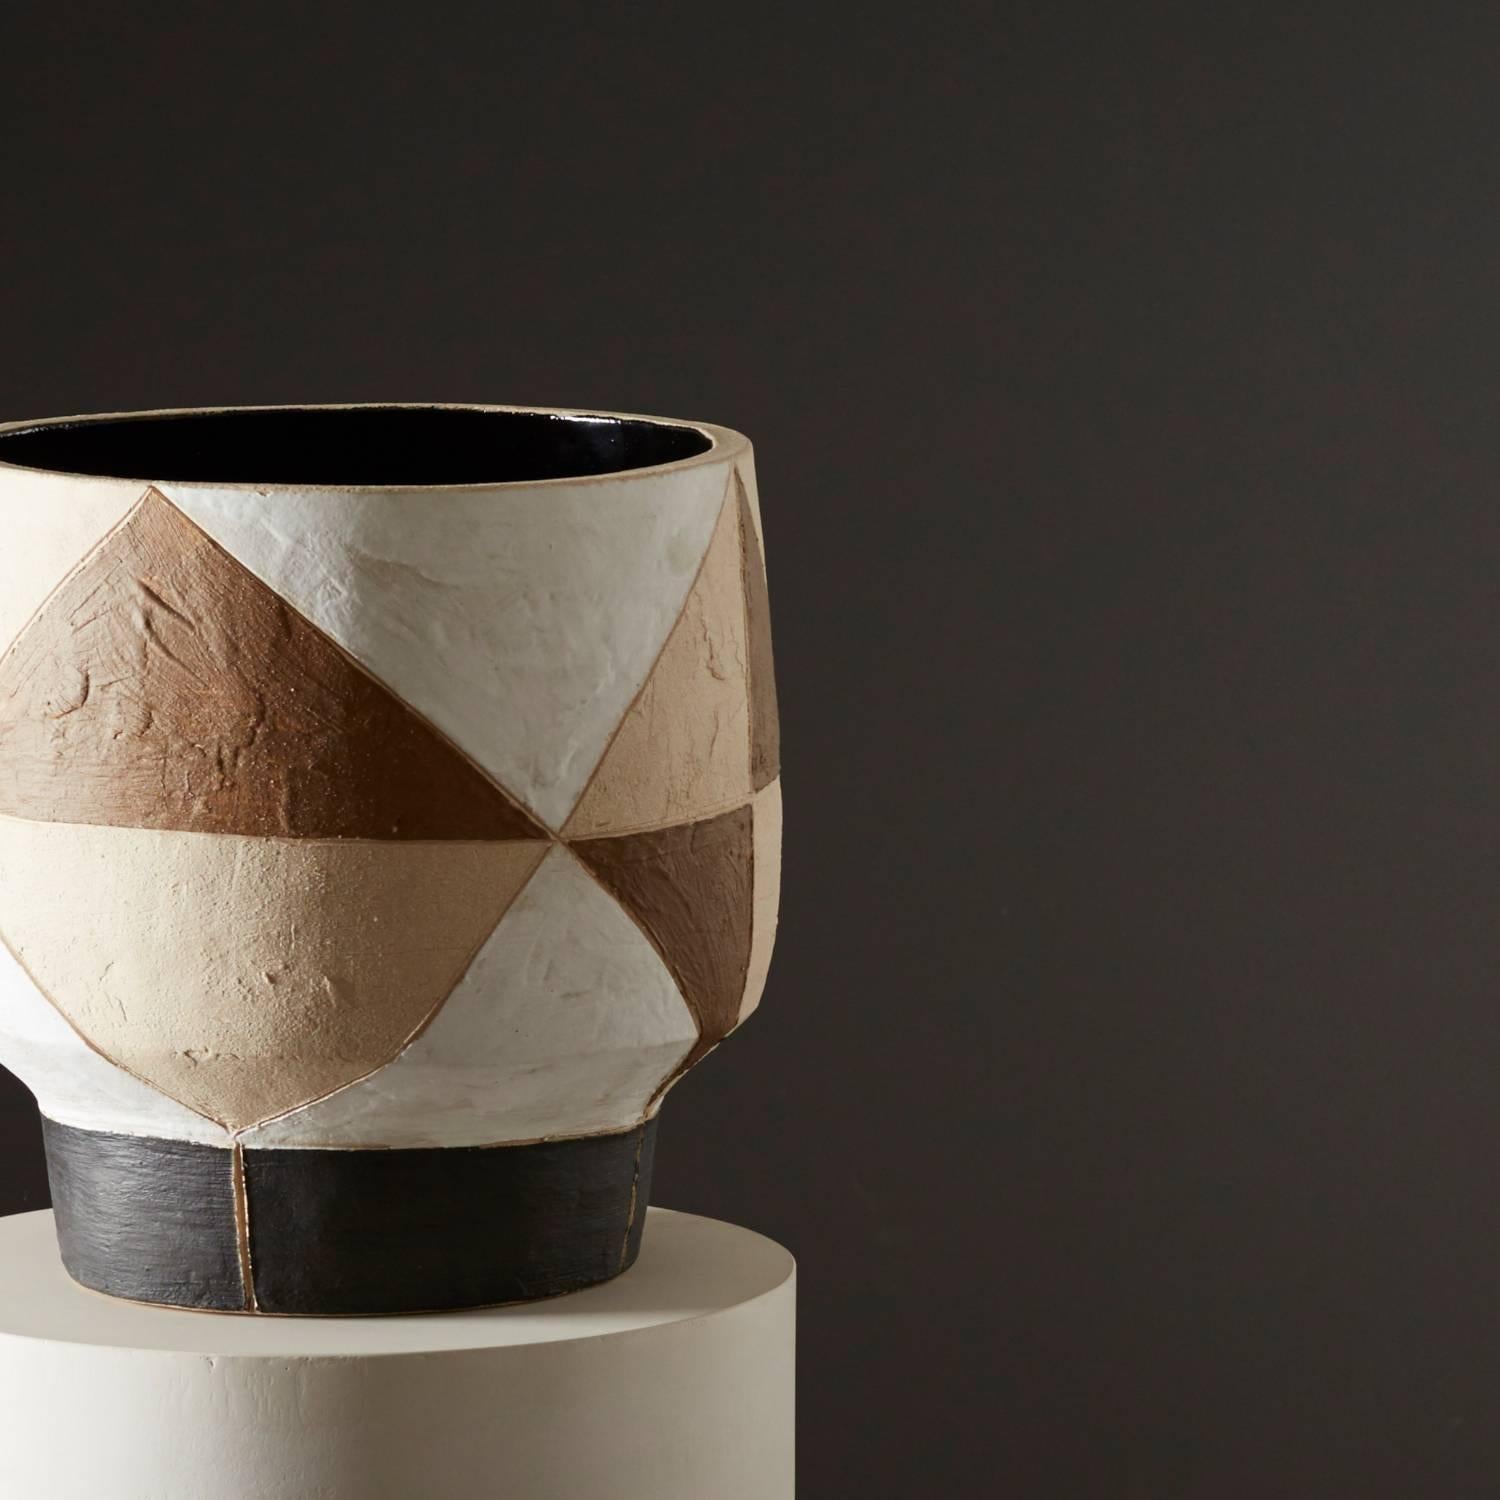 Daniel Reynolds' cinnamon, chalk and obsidian geometric pot is part of a handmade ceramics range inspired by the methods of the ancients

Daniel’s large hand built pots operate as striking focal points, helping to define larger spaces, highlight